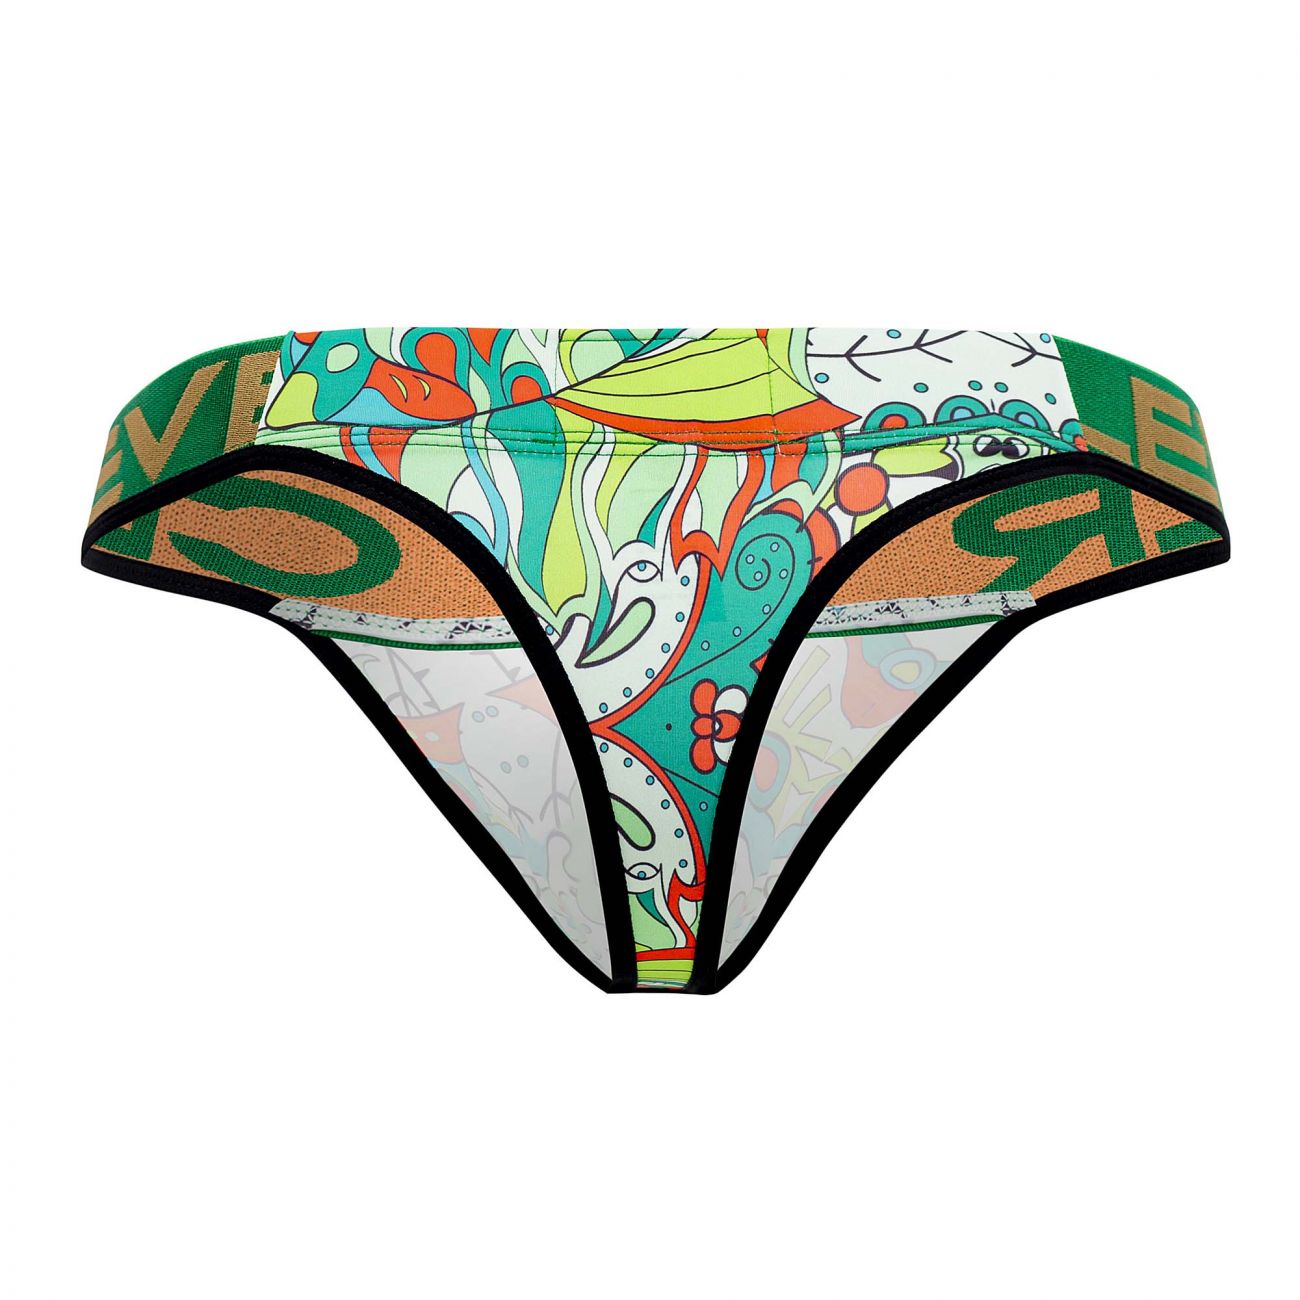 Clever Psychedelic Thongs